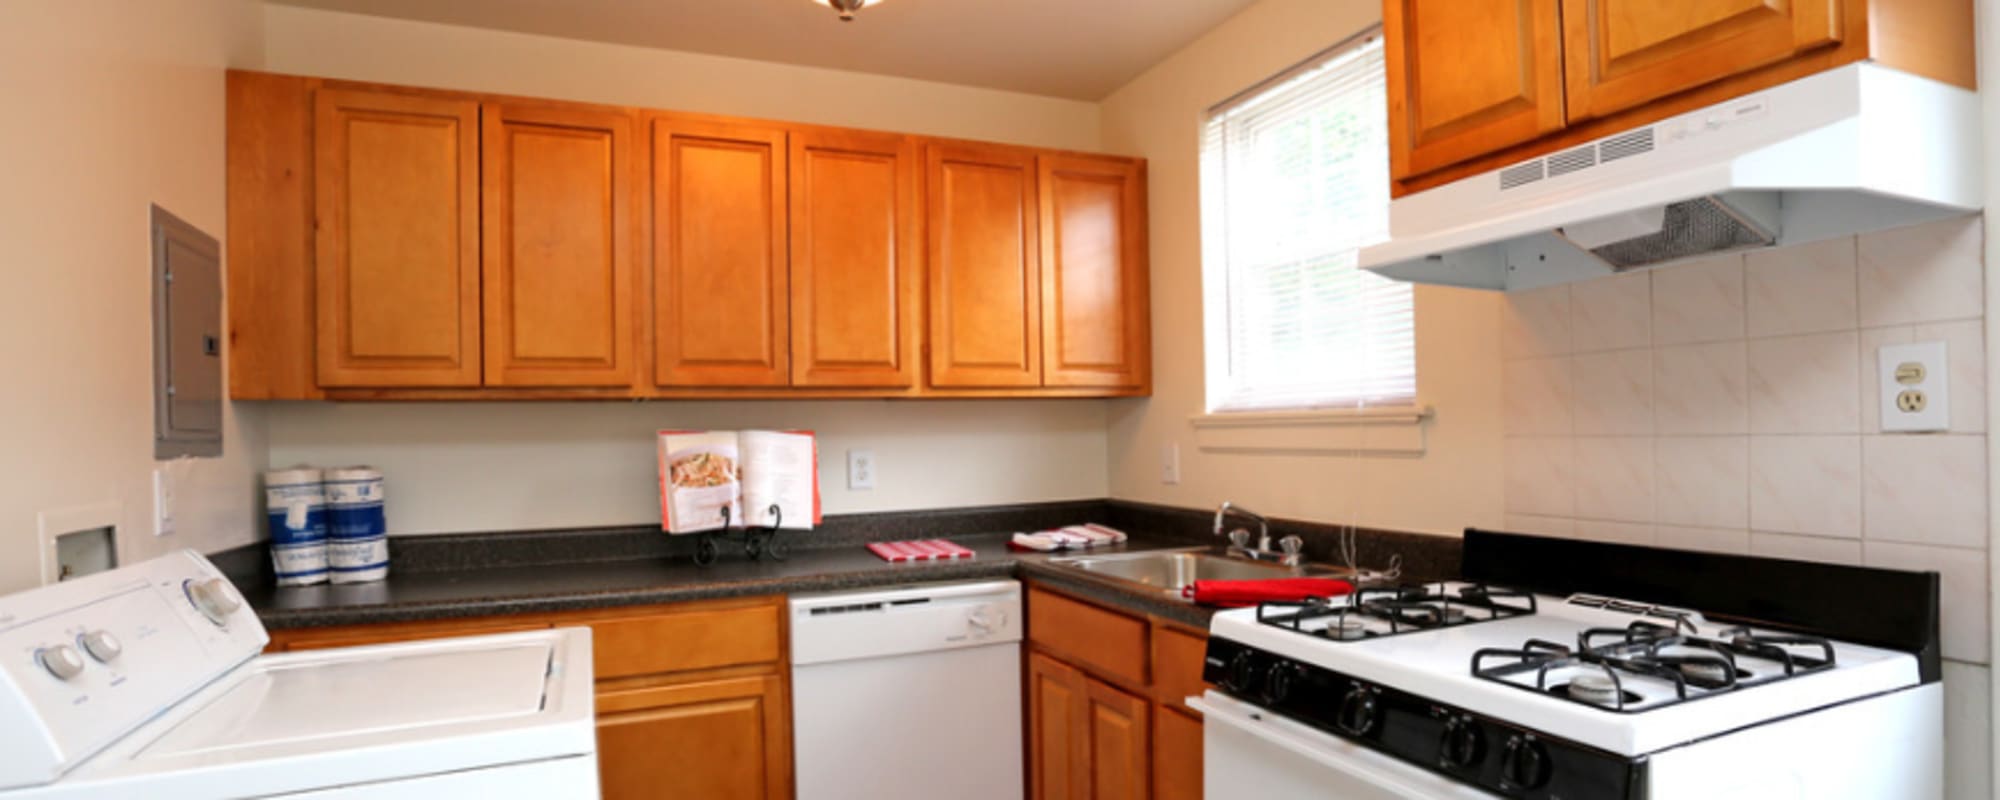 Kitchen in Morningside Apartments in Richmond, Virginia